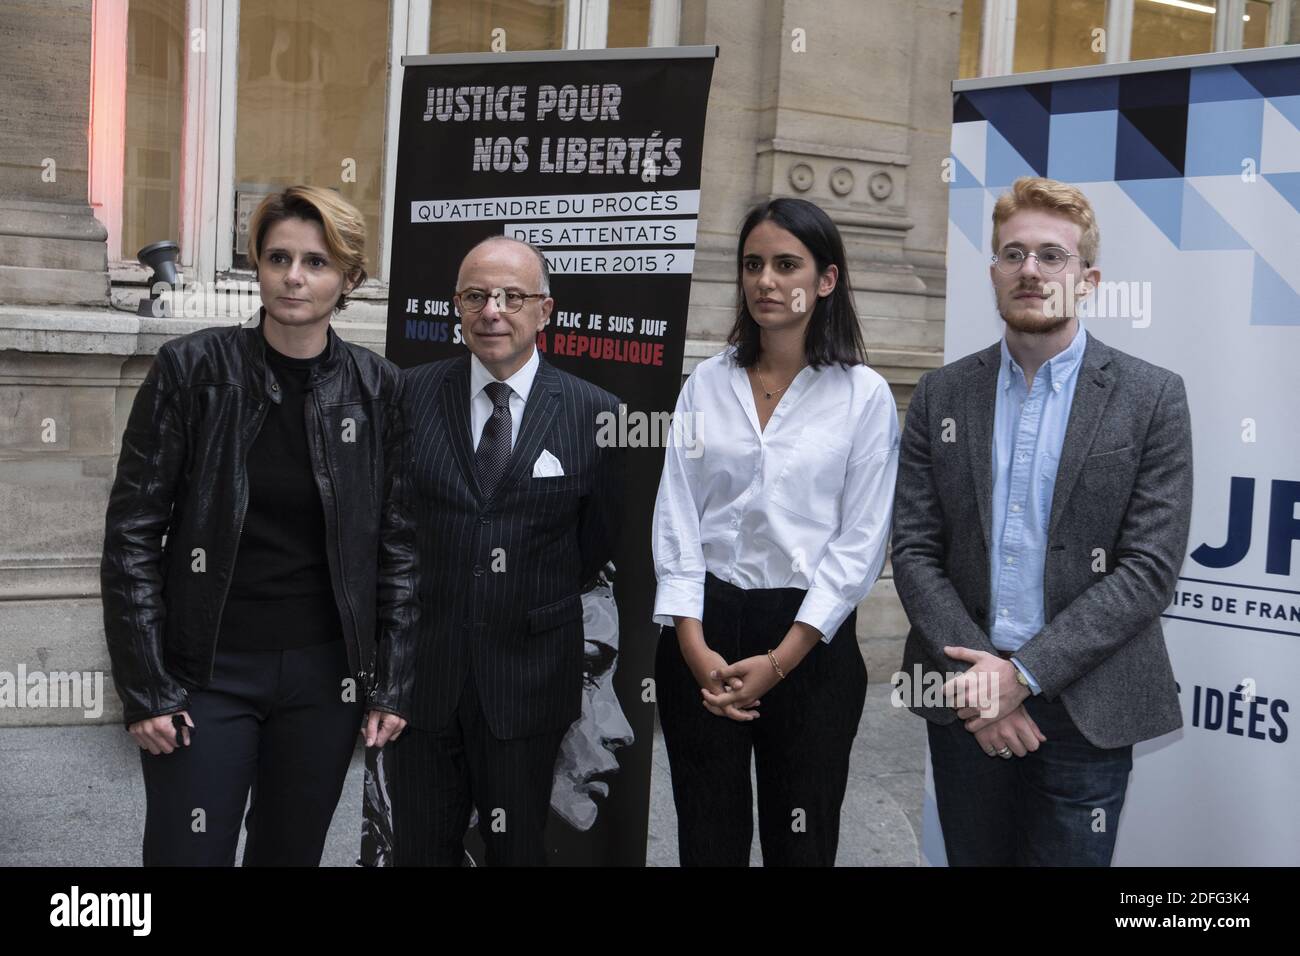 French director Caroline Fourest, French former Prime Minister Bernard Cazeneuve, Noémie Madar, President of the Union of Jewish Students of France (UEJF) and Yossef Murciano during a round table with witnesses and personalities organized by the UEJF, on the eve of the opening of the trial of the January 2015 attacks. Paris, France on September 1, 2020. Photo by Pierrick Villette/Avenir Pictures/ABACAPRESS.COM Stock Photo